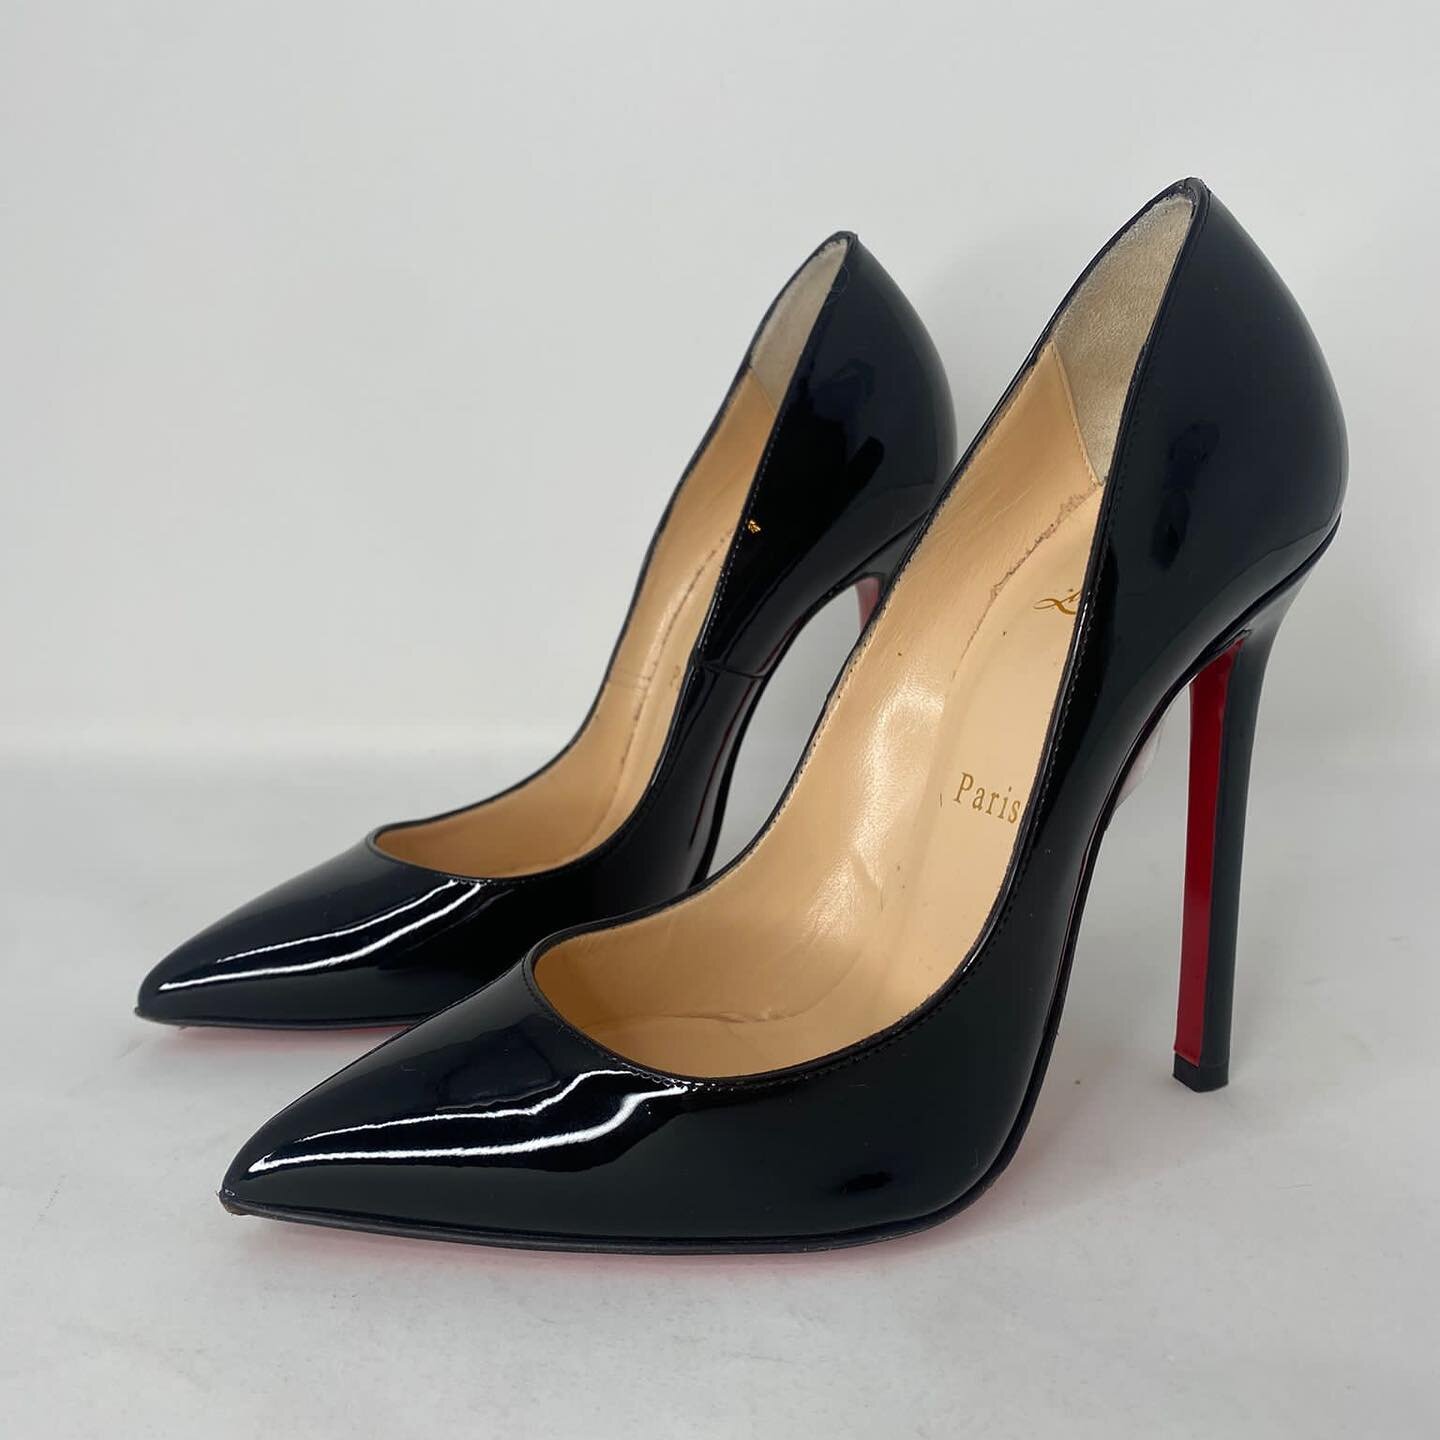 Can anything beat a classic Louboutin heel? Red soles only @louboutinworld ❤️